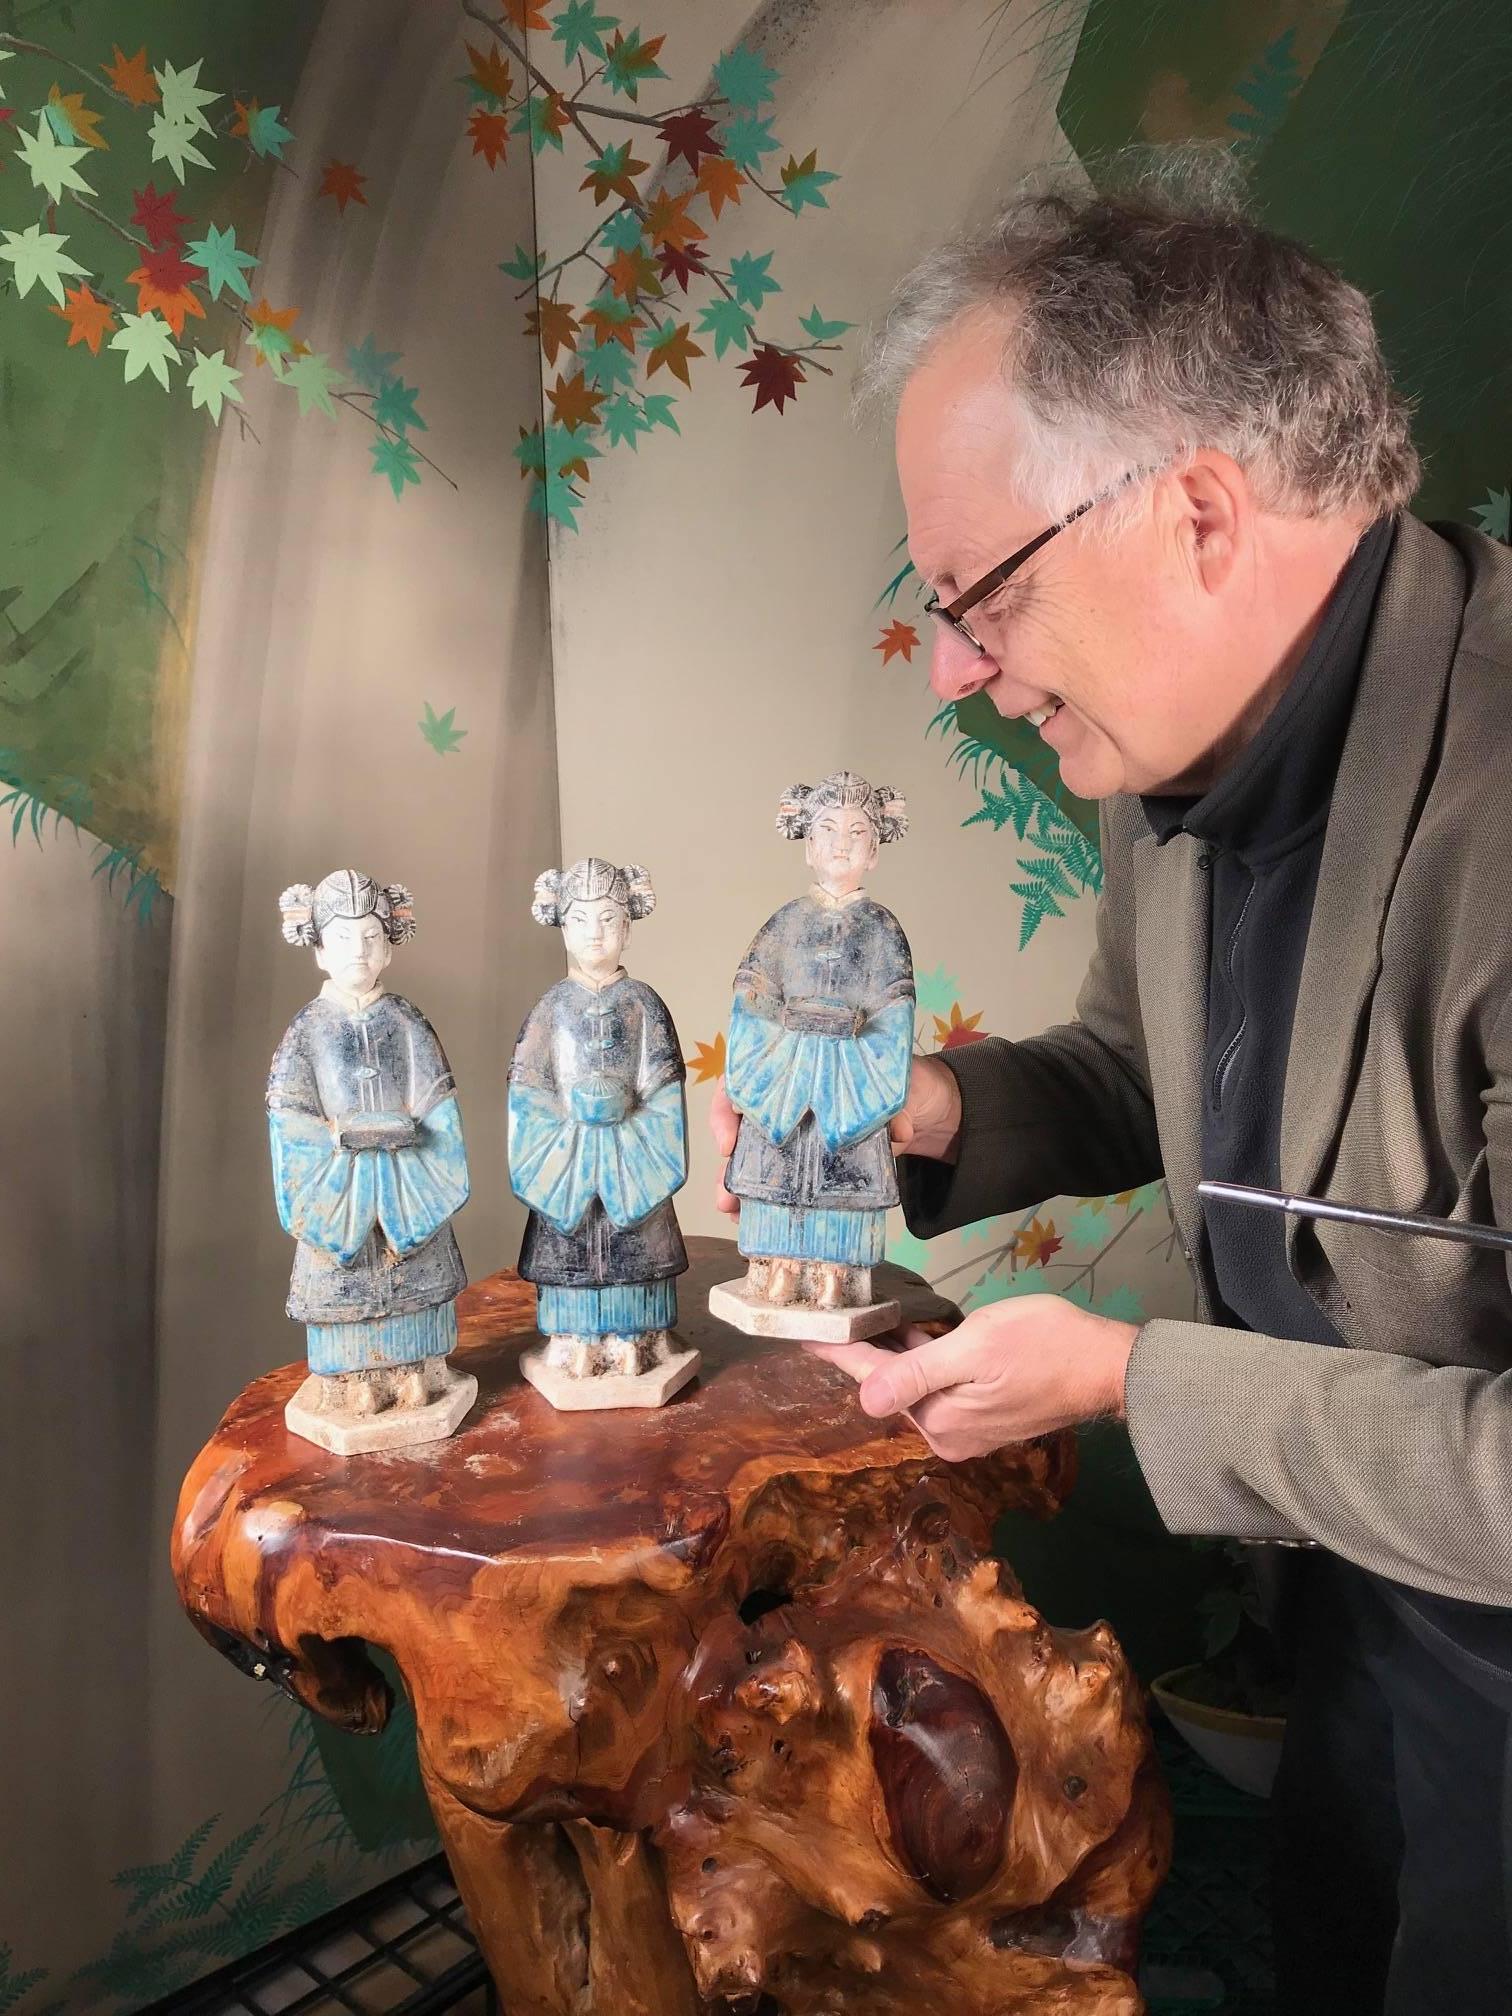 Important Ancient Chinese Trio of three women attendants handmade and hand glazed in vibrant turquoise and cobalt blue colors - a collection three figures, Ming dynasty 1368-1644. Superb quality.

The statues each are dressed in long gowns with long